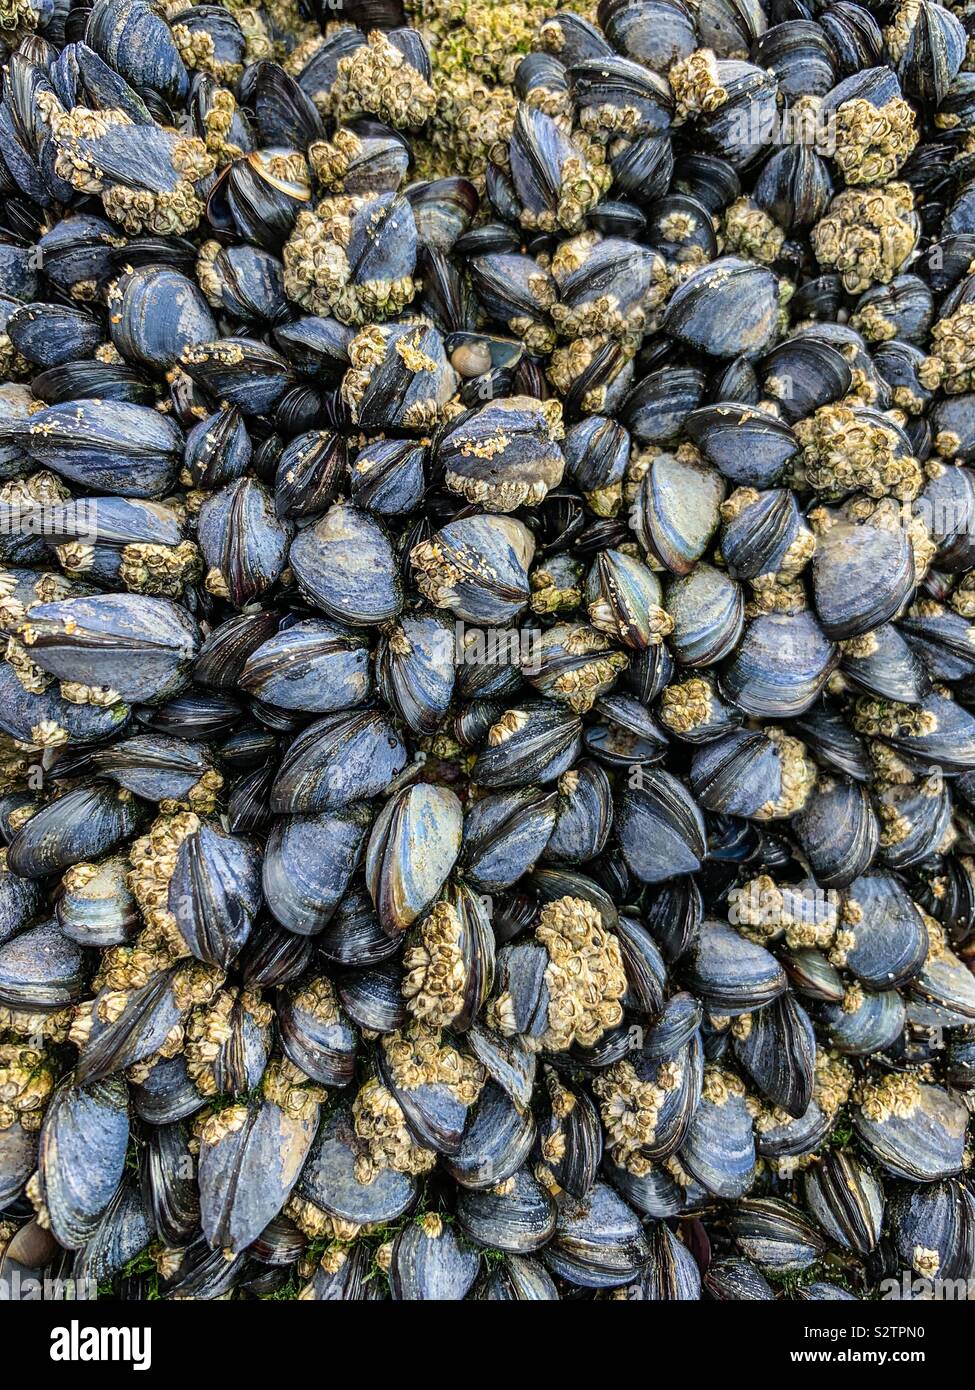 Black clams and mussels on beach wall Stock Photo